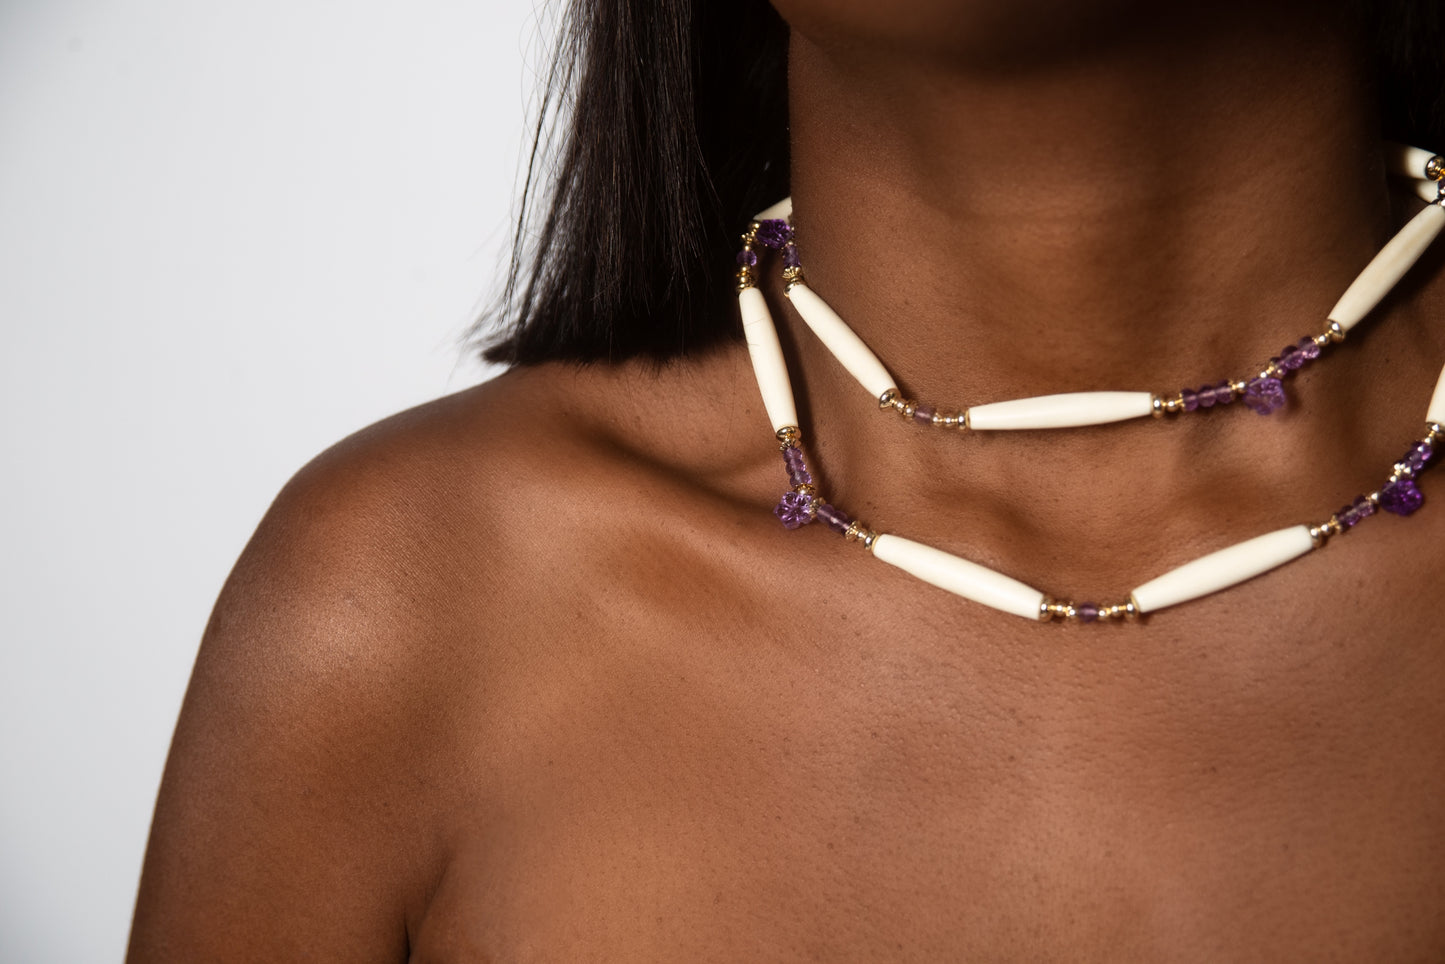 A woman wearing the Ilium Wing Enthrone necklace with purple and white beads that symbolizes tranquility and spirituality.